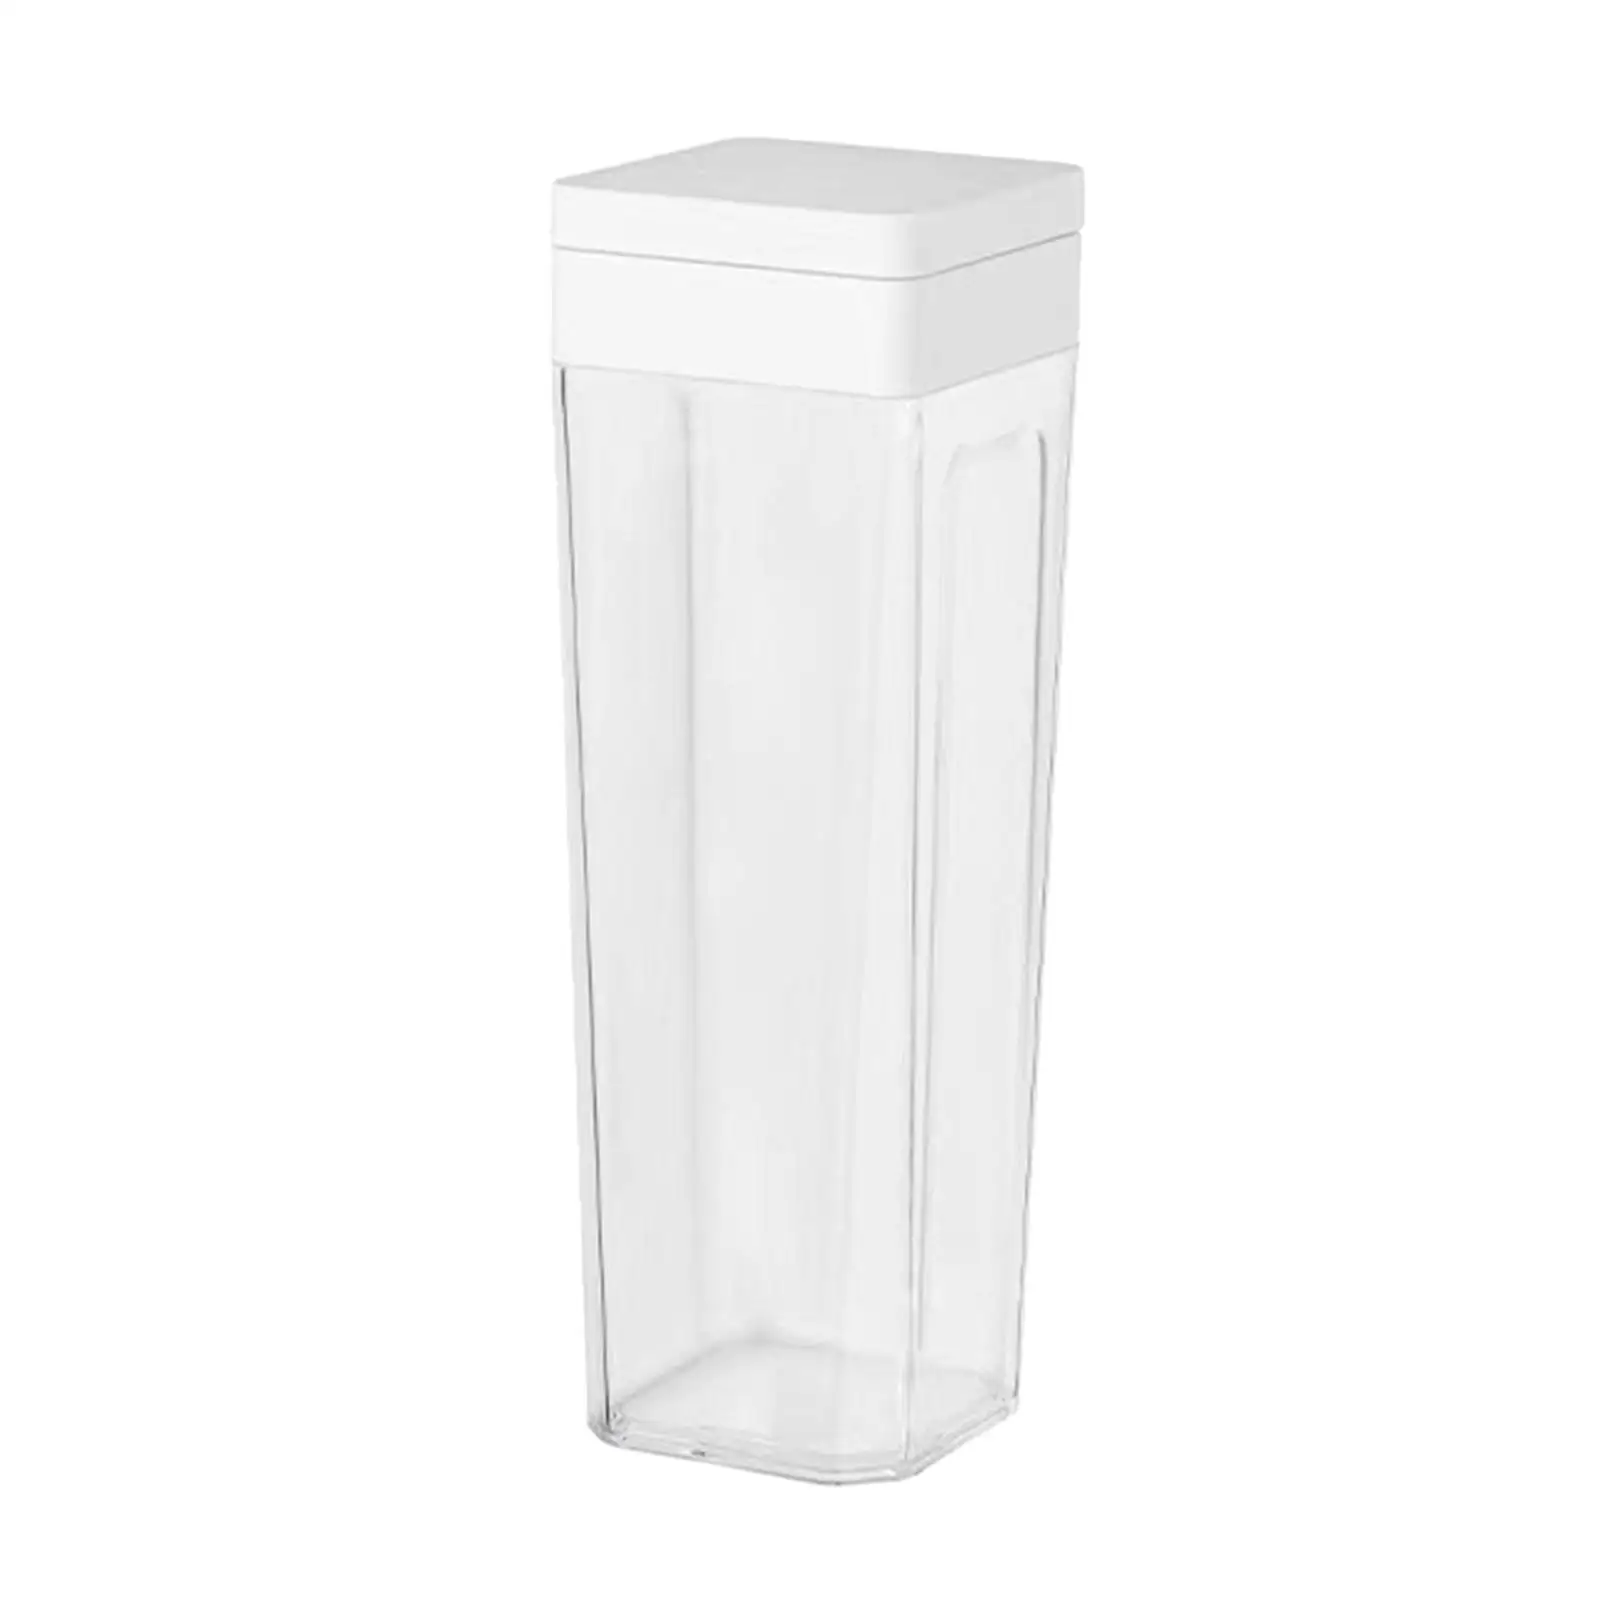 Square Cereal Dispenser Airtight Lid Easily Cleaning Clear Food Storage Container for Freezer Pet Food Grains Coffee Bean